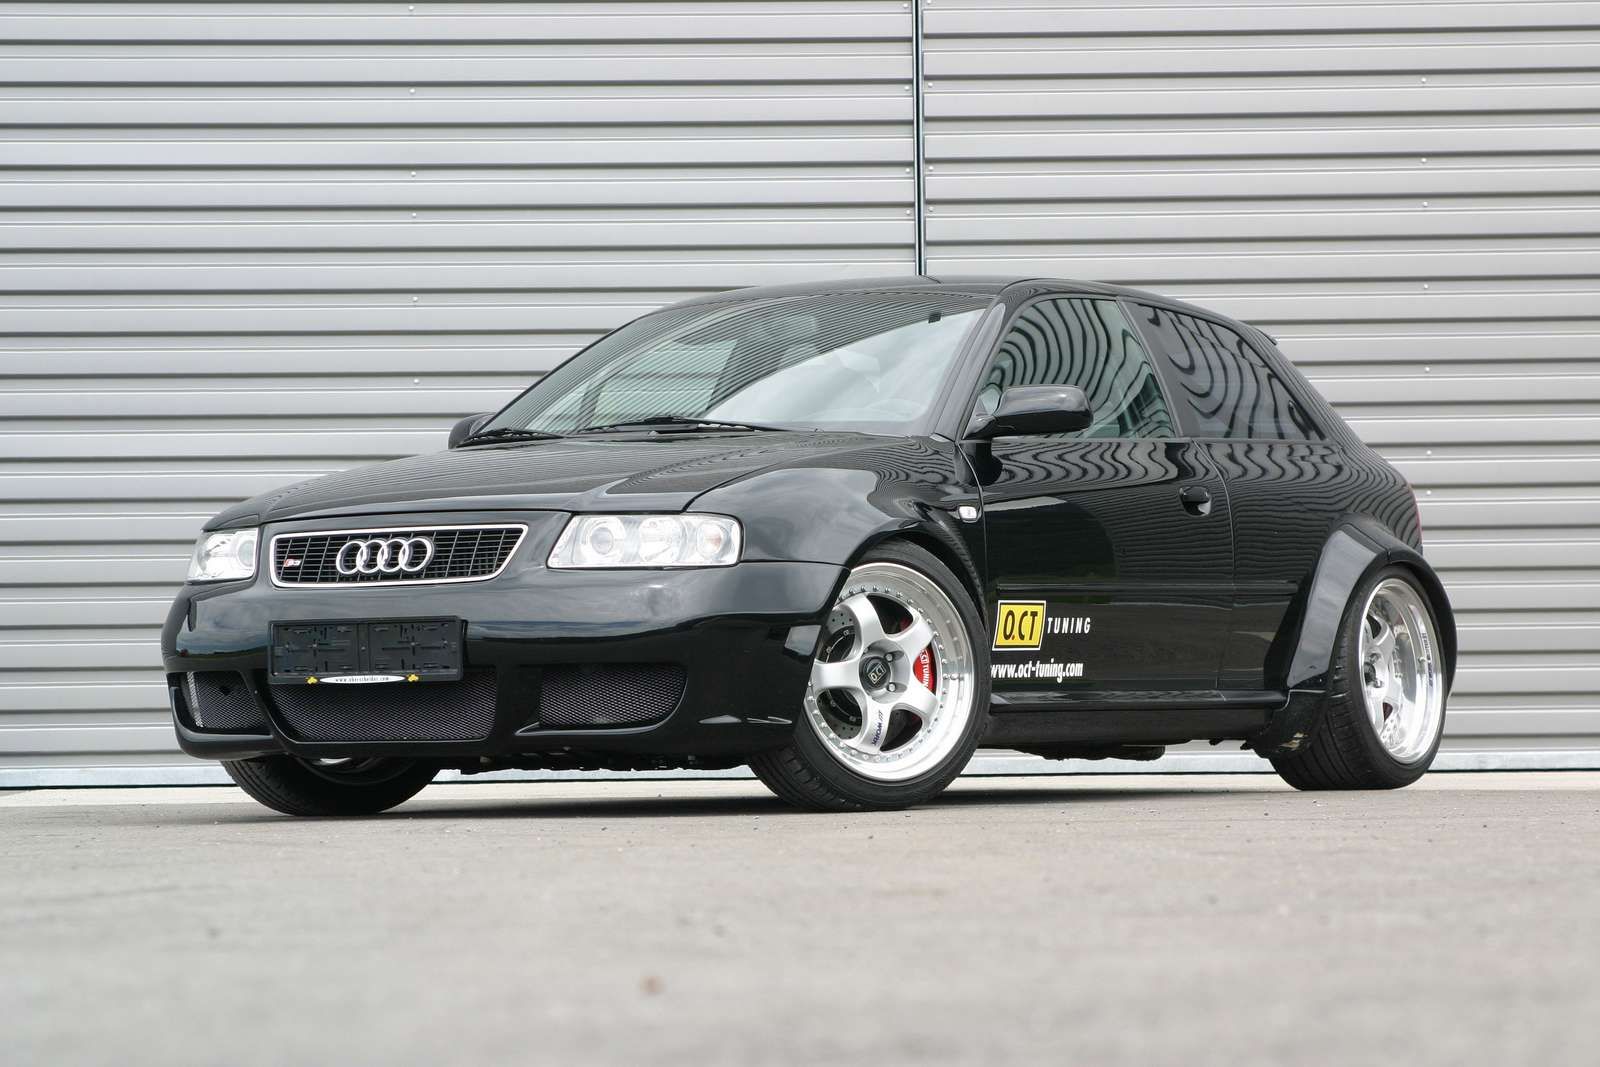 CT S3 Biturbo Based On The Audi S3 Picture, Photo, Wallpaper